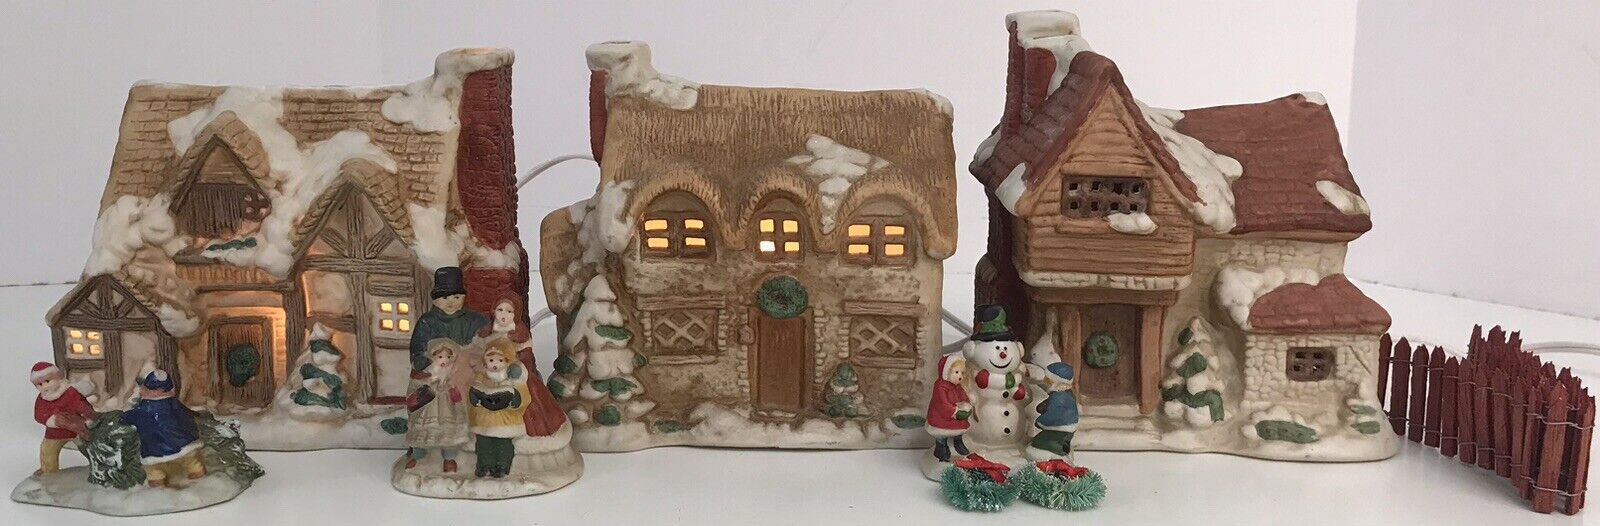 Vintage Christmas Village Houses Set w/ Snowman Family Lighted Buildings *Read*